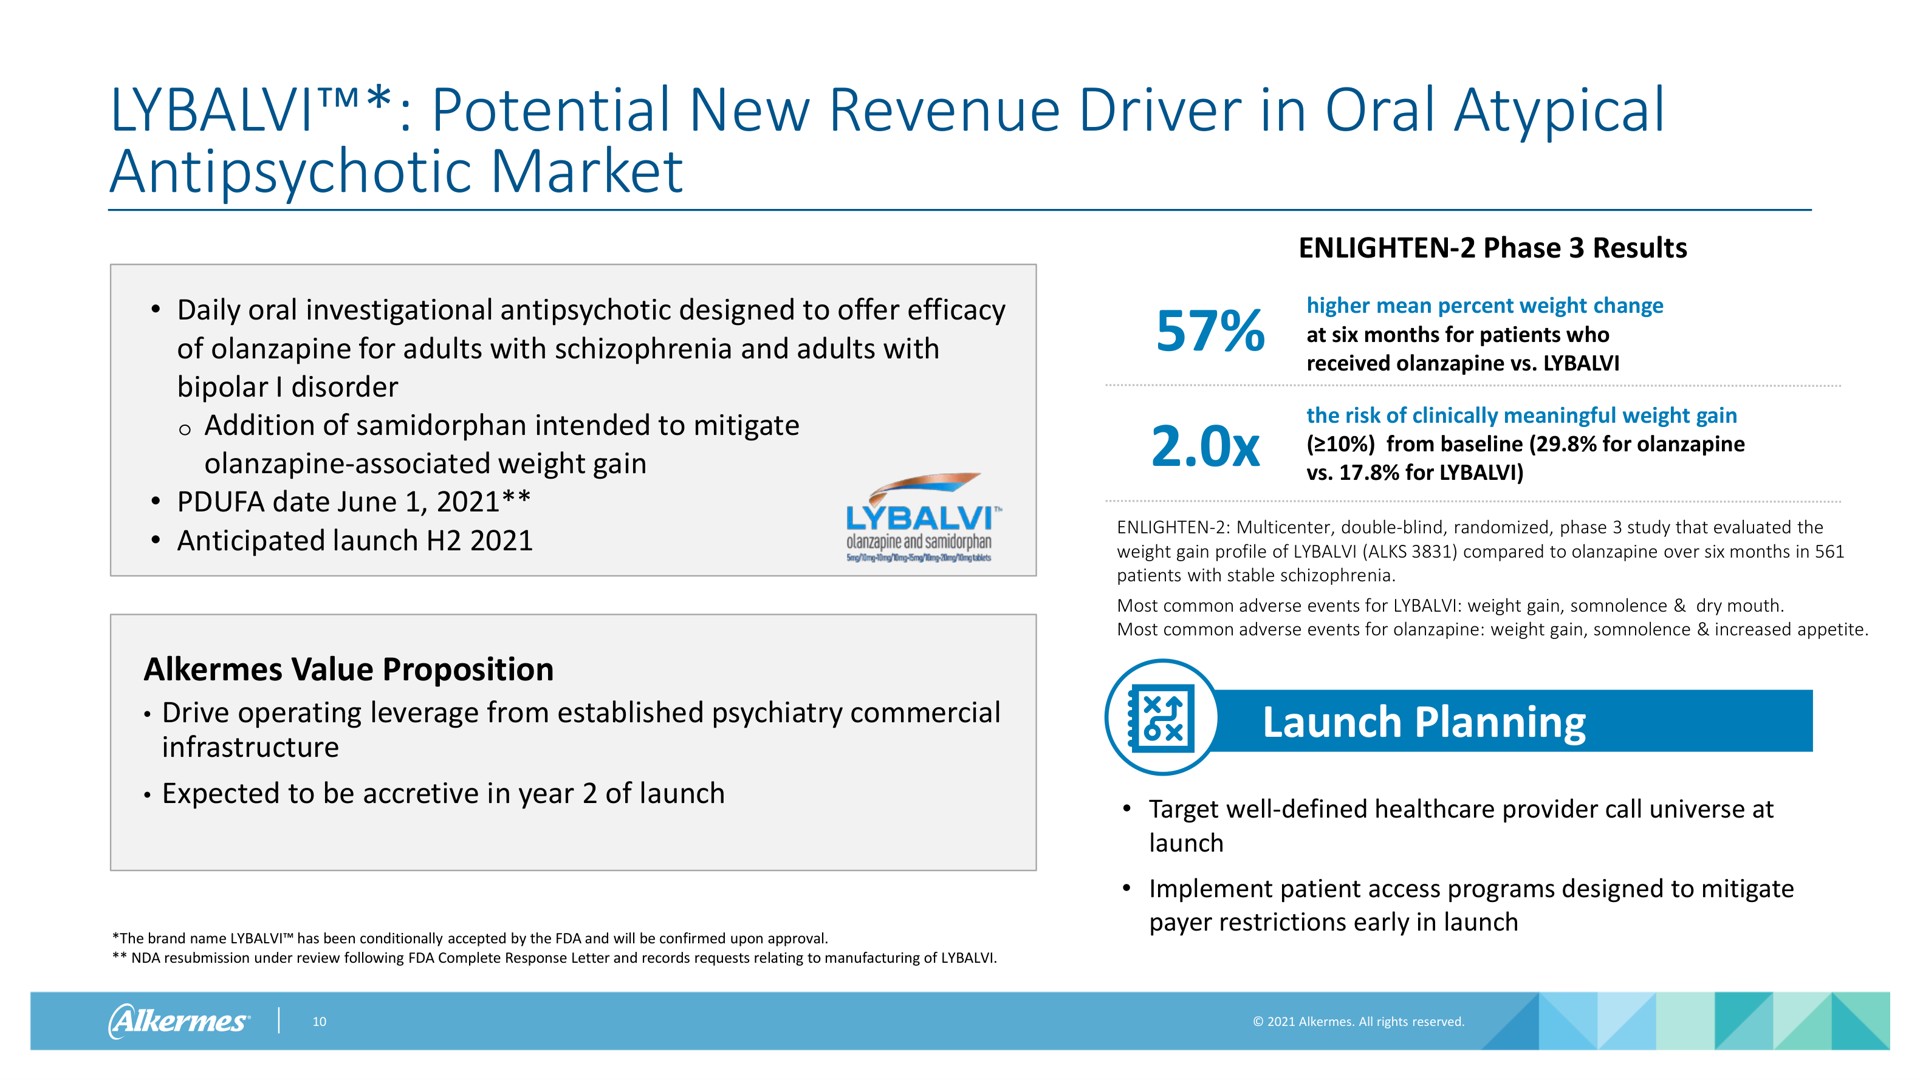 potential new revenue driver in oral atypical market daily oral investigational designed to offer efficacy of for adults with schizophrenia and adults with bipolar i disorder addition of intended to mitigate associated weight gain date june anticipated launch alkermes value proposition drive operating leverage from established psychiatry commercial infrastructure expected to be accretive in year of launch the brand name has been conditionally accepted by the and will be confirmed upon approval resubmission under review following complete response letter and records requests relating to manufacturing of enlighten phase results higher mean percent weight change at six months for patients who received the risk of clinically meaningful weight gain from for for enlighten double blind randomized phase study that evaluated the weight gain profile of compared to over six months in patients with stable schizophrenia most common adverse events for weight gain somnolence dry mouth most common adverse events for weight gain somnolence increased appetite launch planning target well defined provider call universe at launch implement patient access programs designed to mitigate payer restrictions early in launch | Alkermes